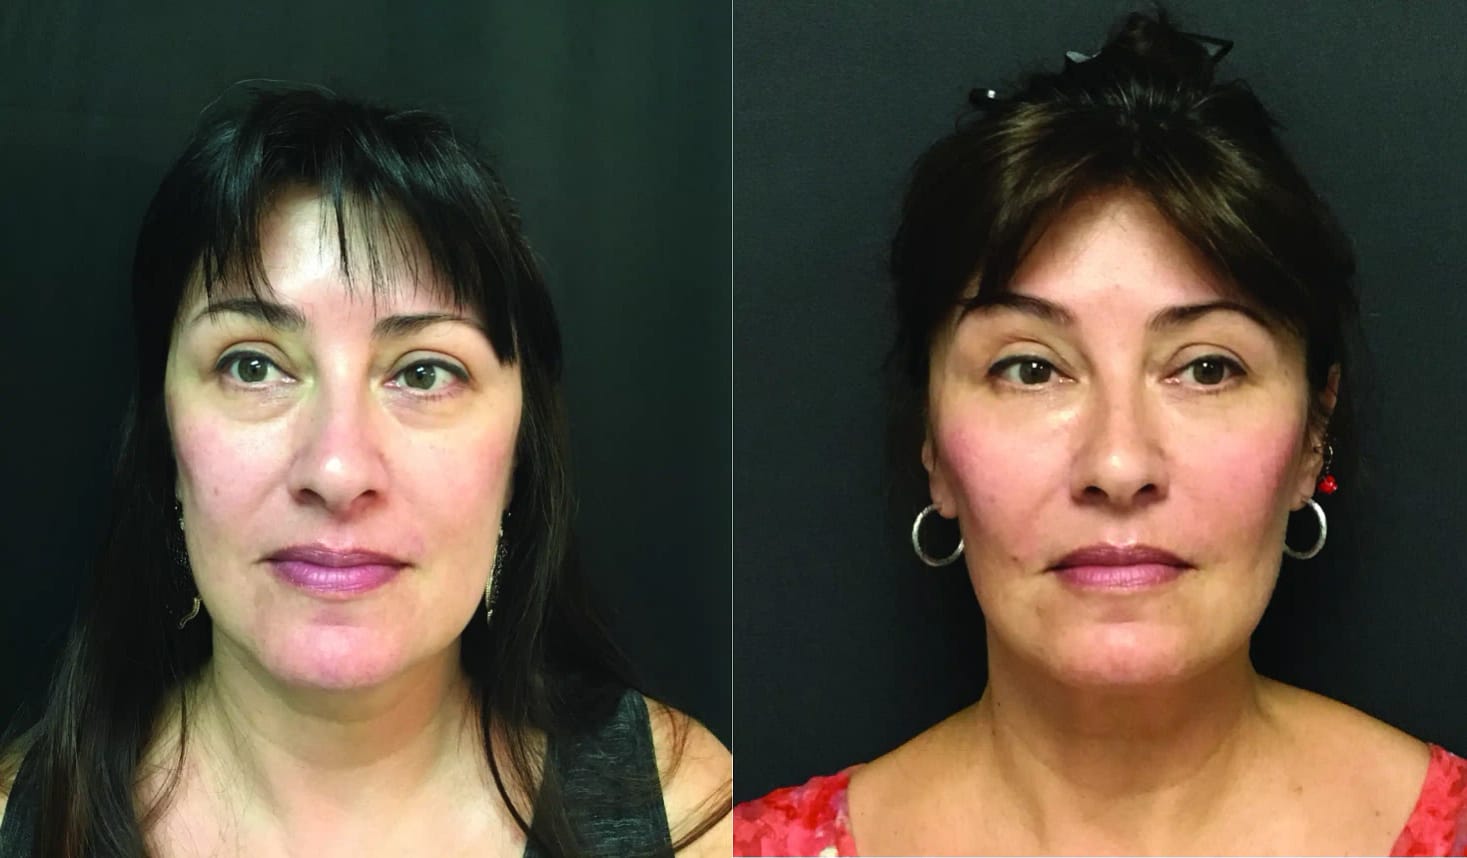 On the left, a woman with visible facial wrinkles before Bellafill treatment. On the right, the same woman with smoother, rejuvenated skin after receiving Bellafill injections.